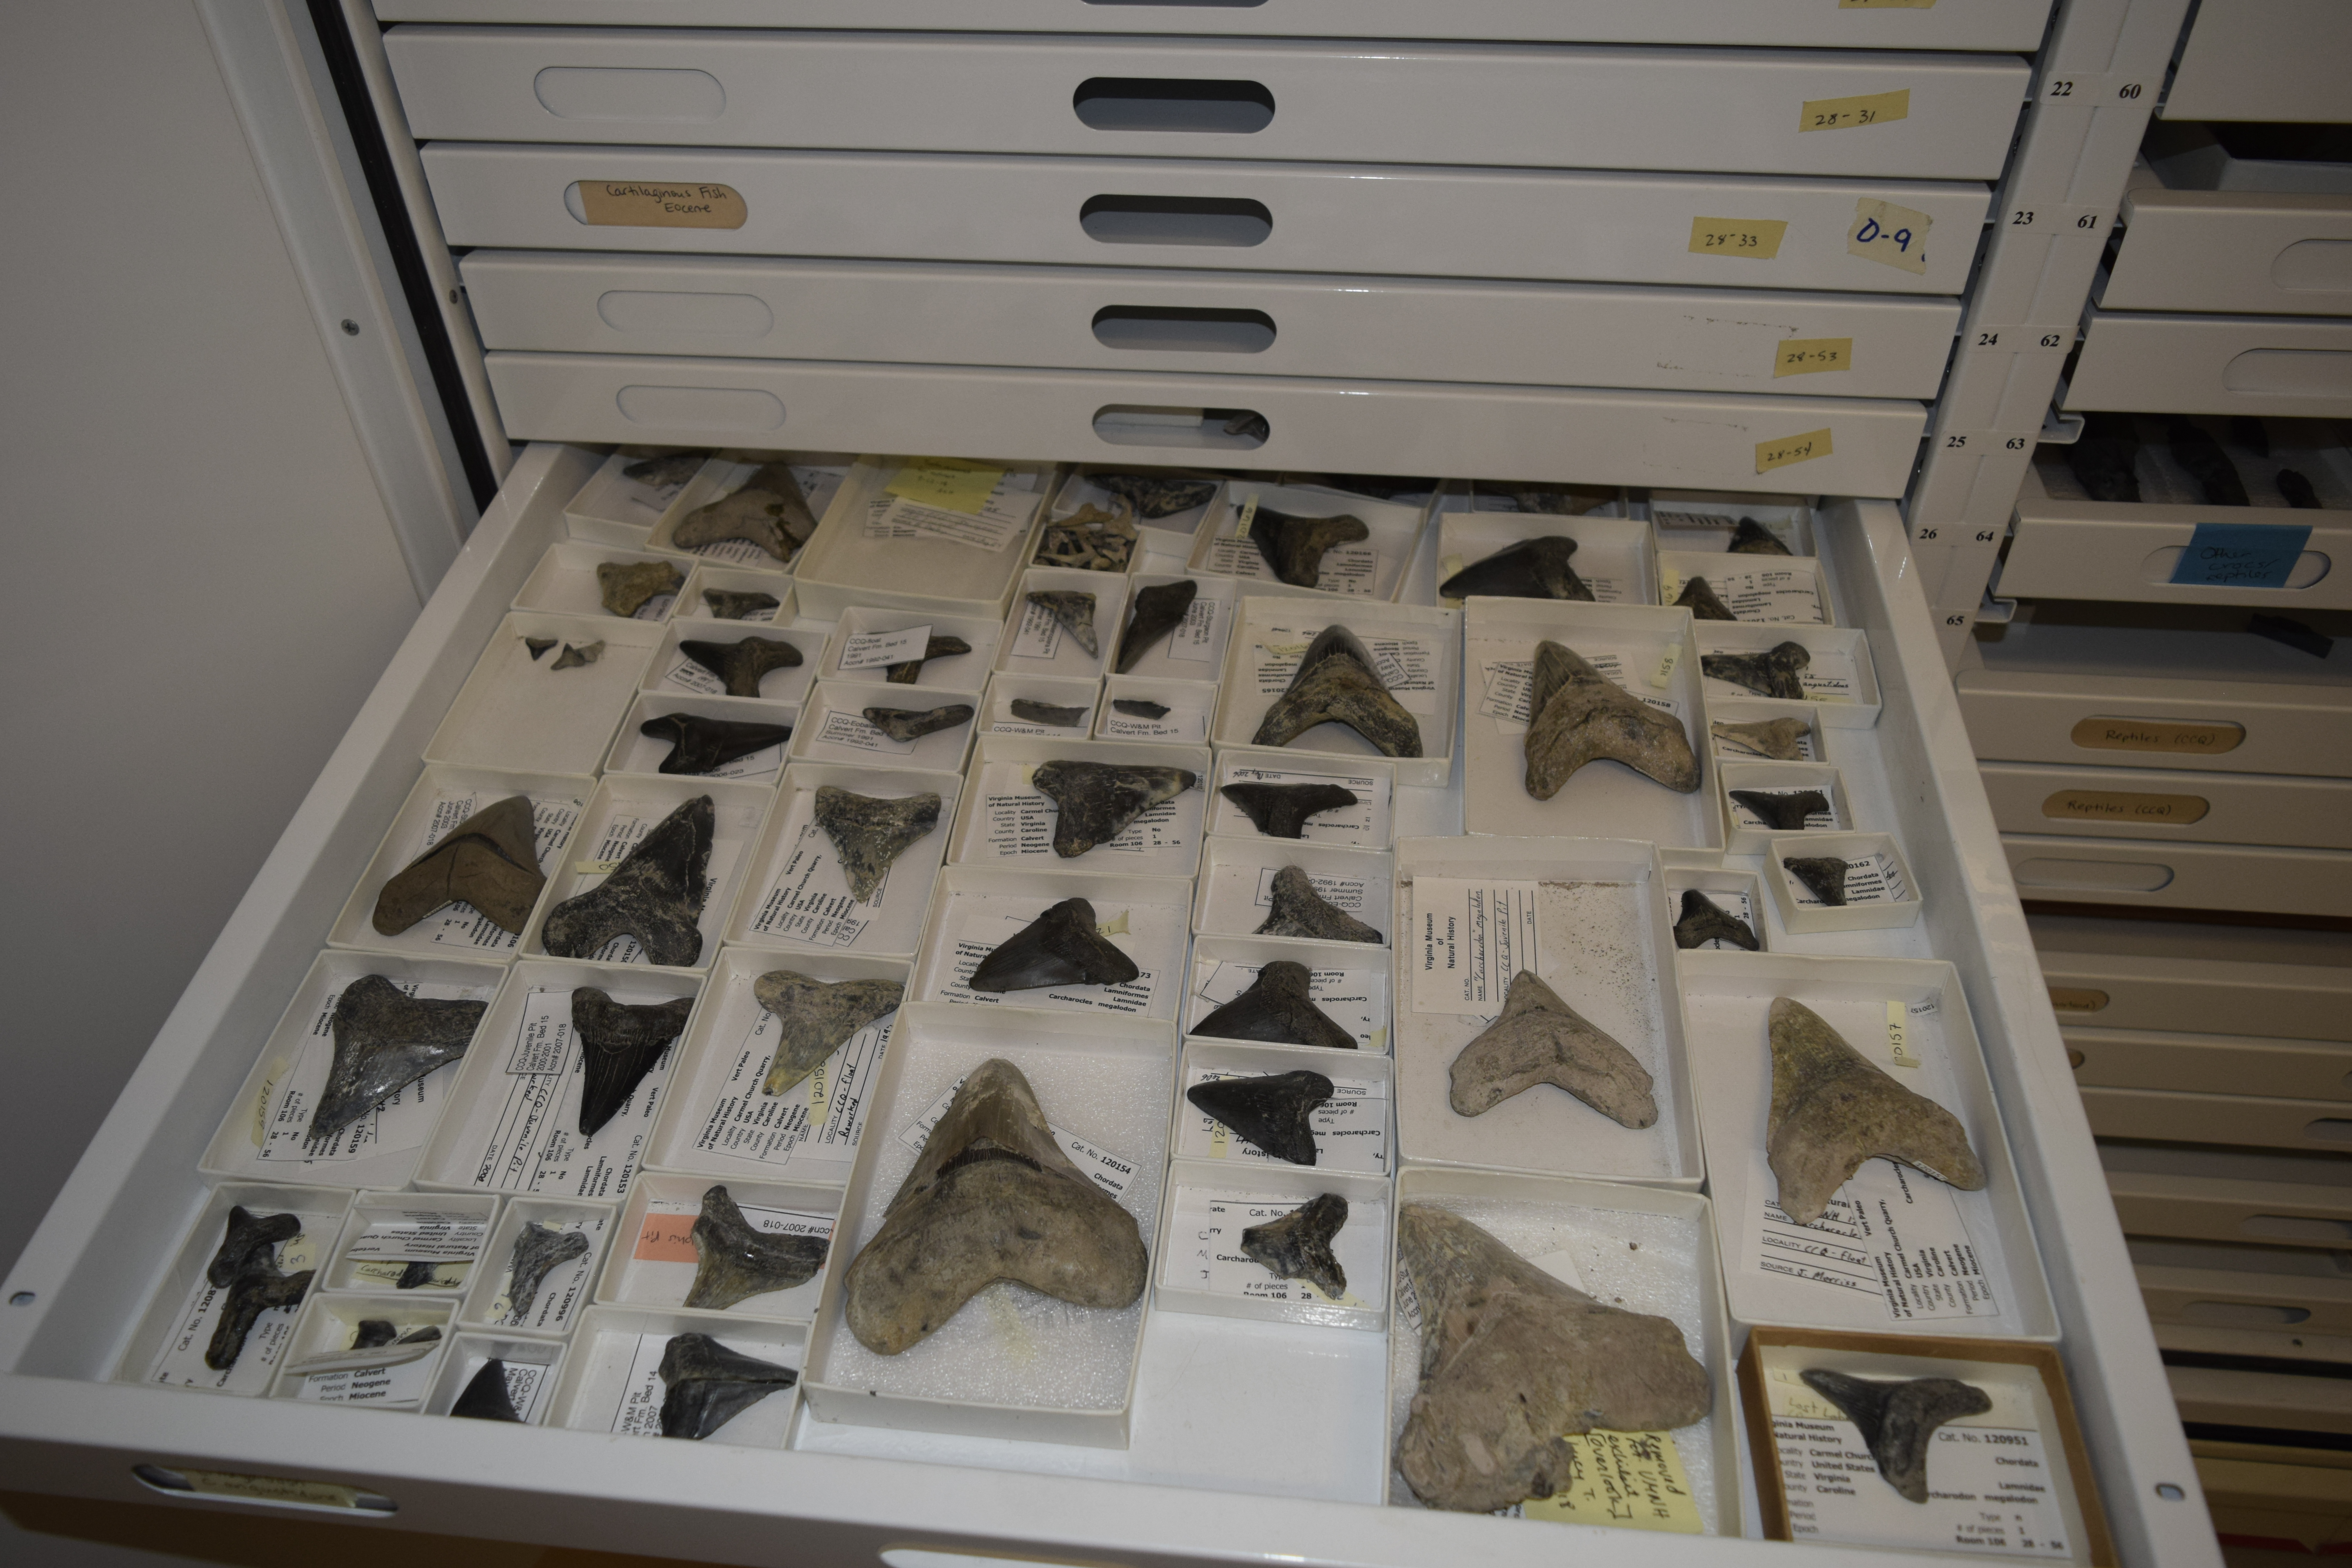 Drawer containing the sample of otodontid shark teeth from Carmel Church. Species represented include Carcharocles angustidens and C. megalodon.